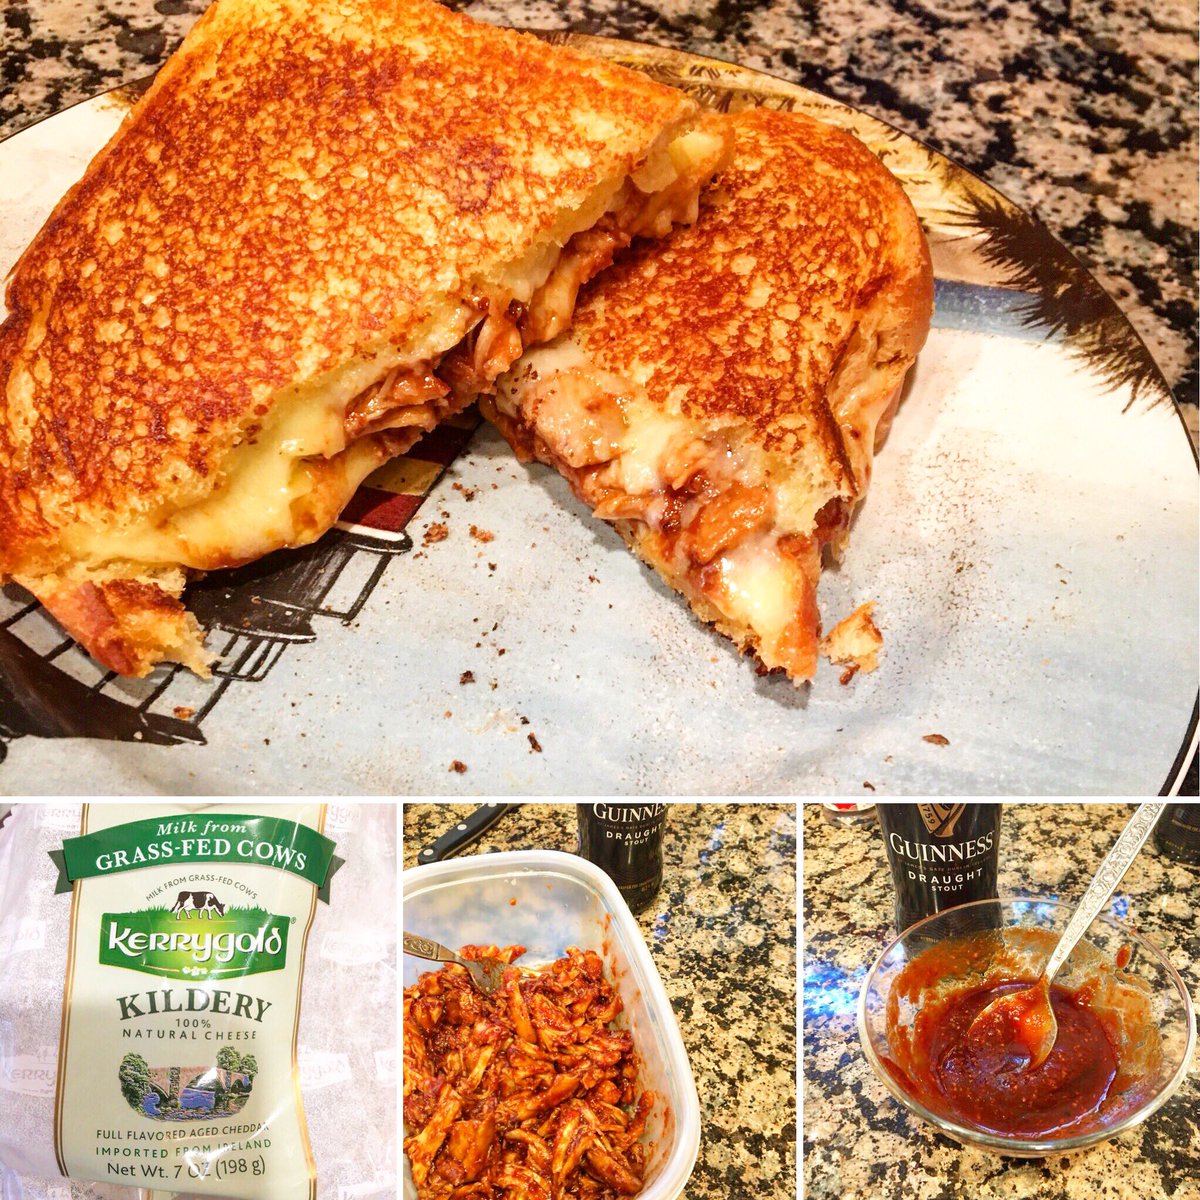 Guinness pulled chicken,  Guinness BBQ sauce,  and Irish cheddar - Irish inspired grilled cheese! 
#whatsforlunch #foodie #guinessbeer #grilledcheese #catering